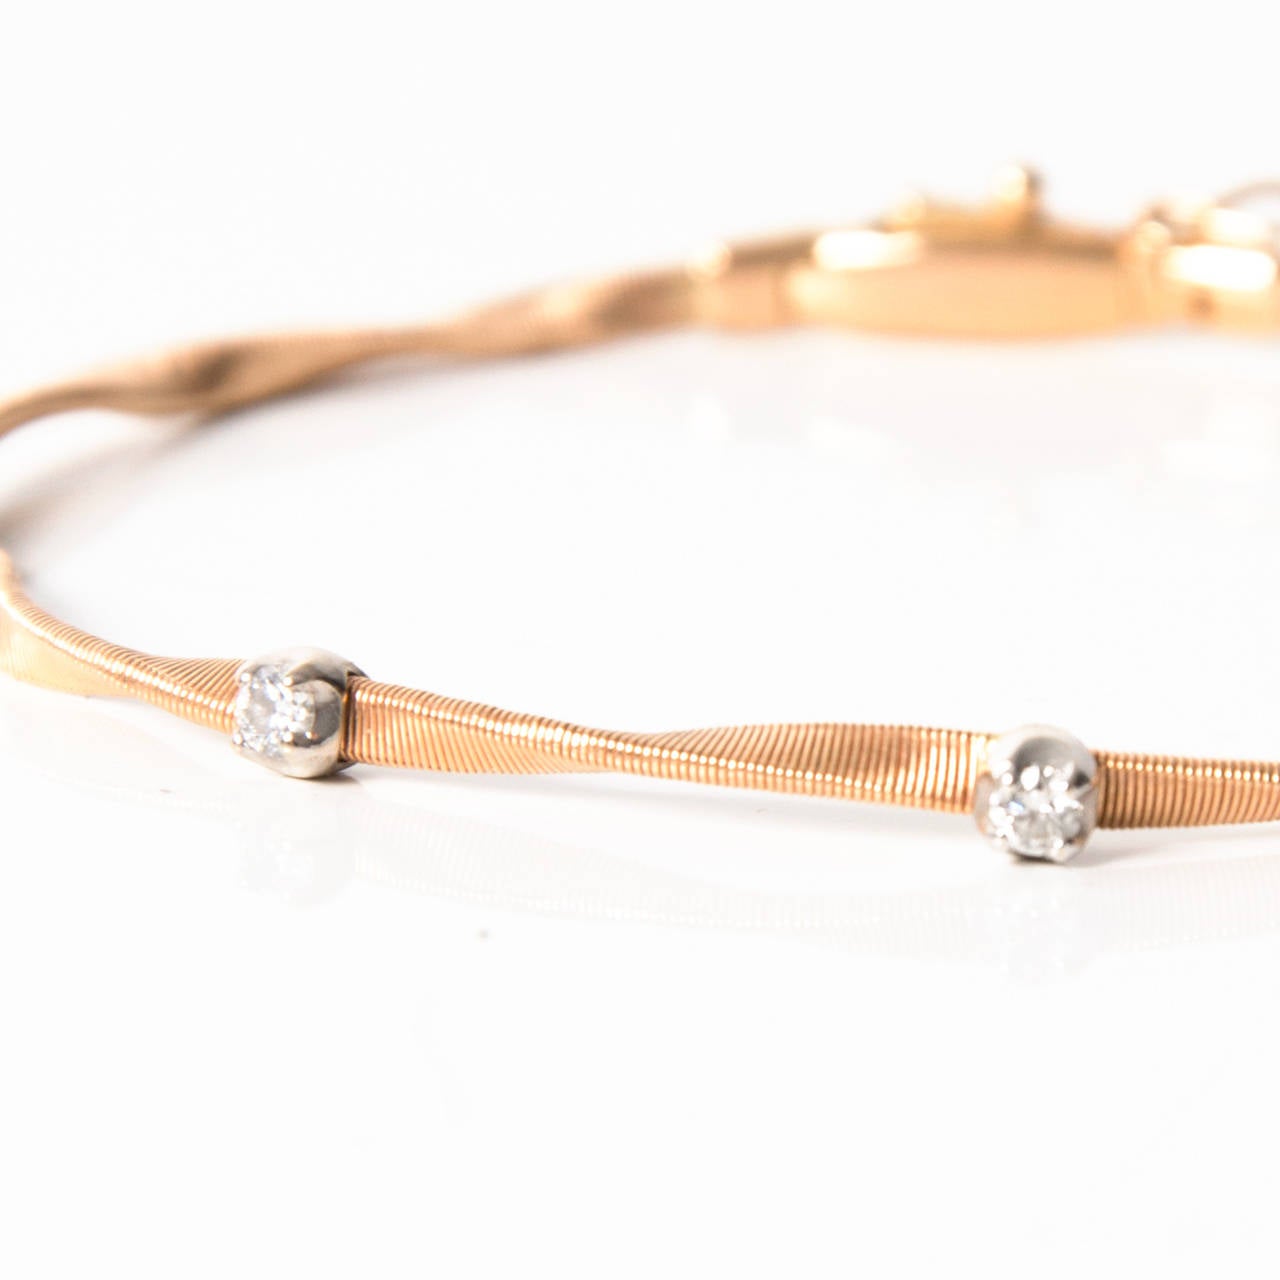 Stunning handcrafted twisted bracelet with three diamonds in 18K yellow gold. Tongue and groove closure.

With fashionable lucidity, this gorgeous bracelet is part of the Marco Bicego Marrakech collection. By hand hammering the gold into a ribbon